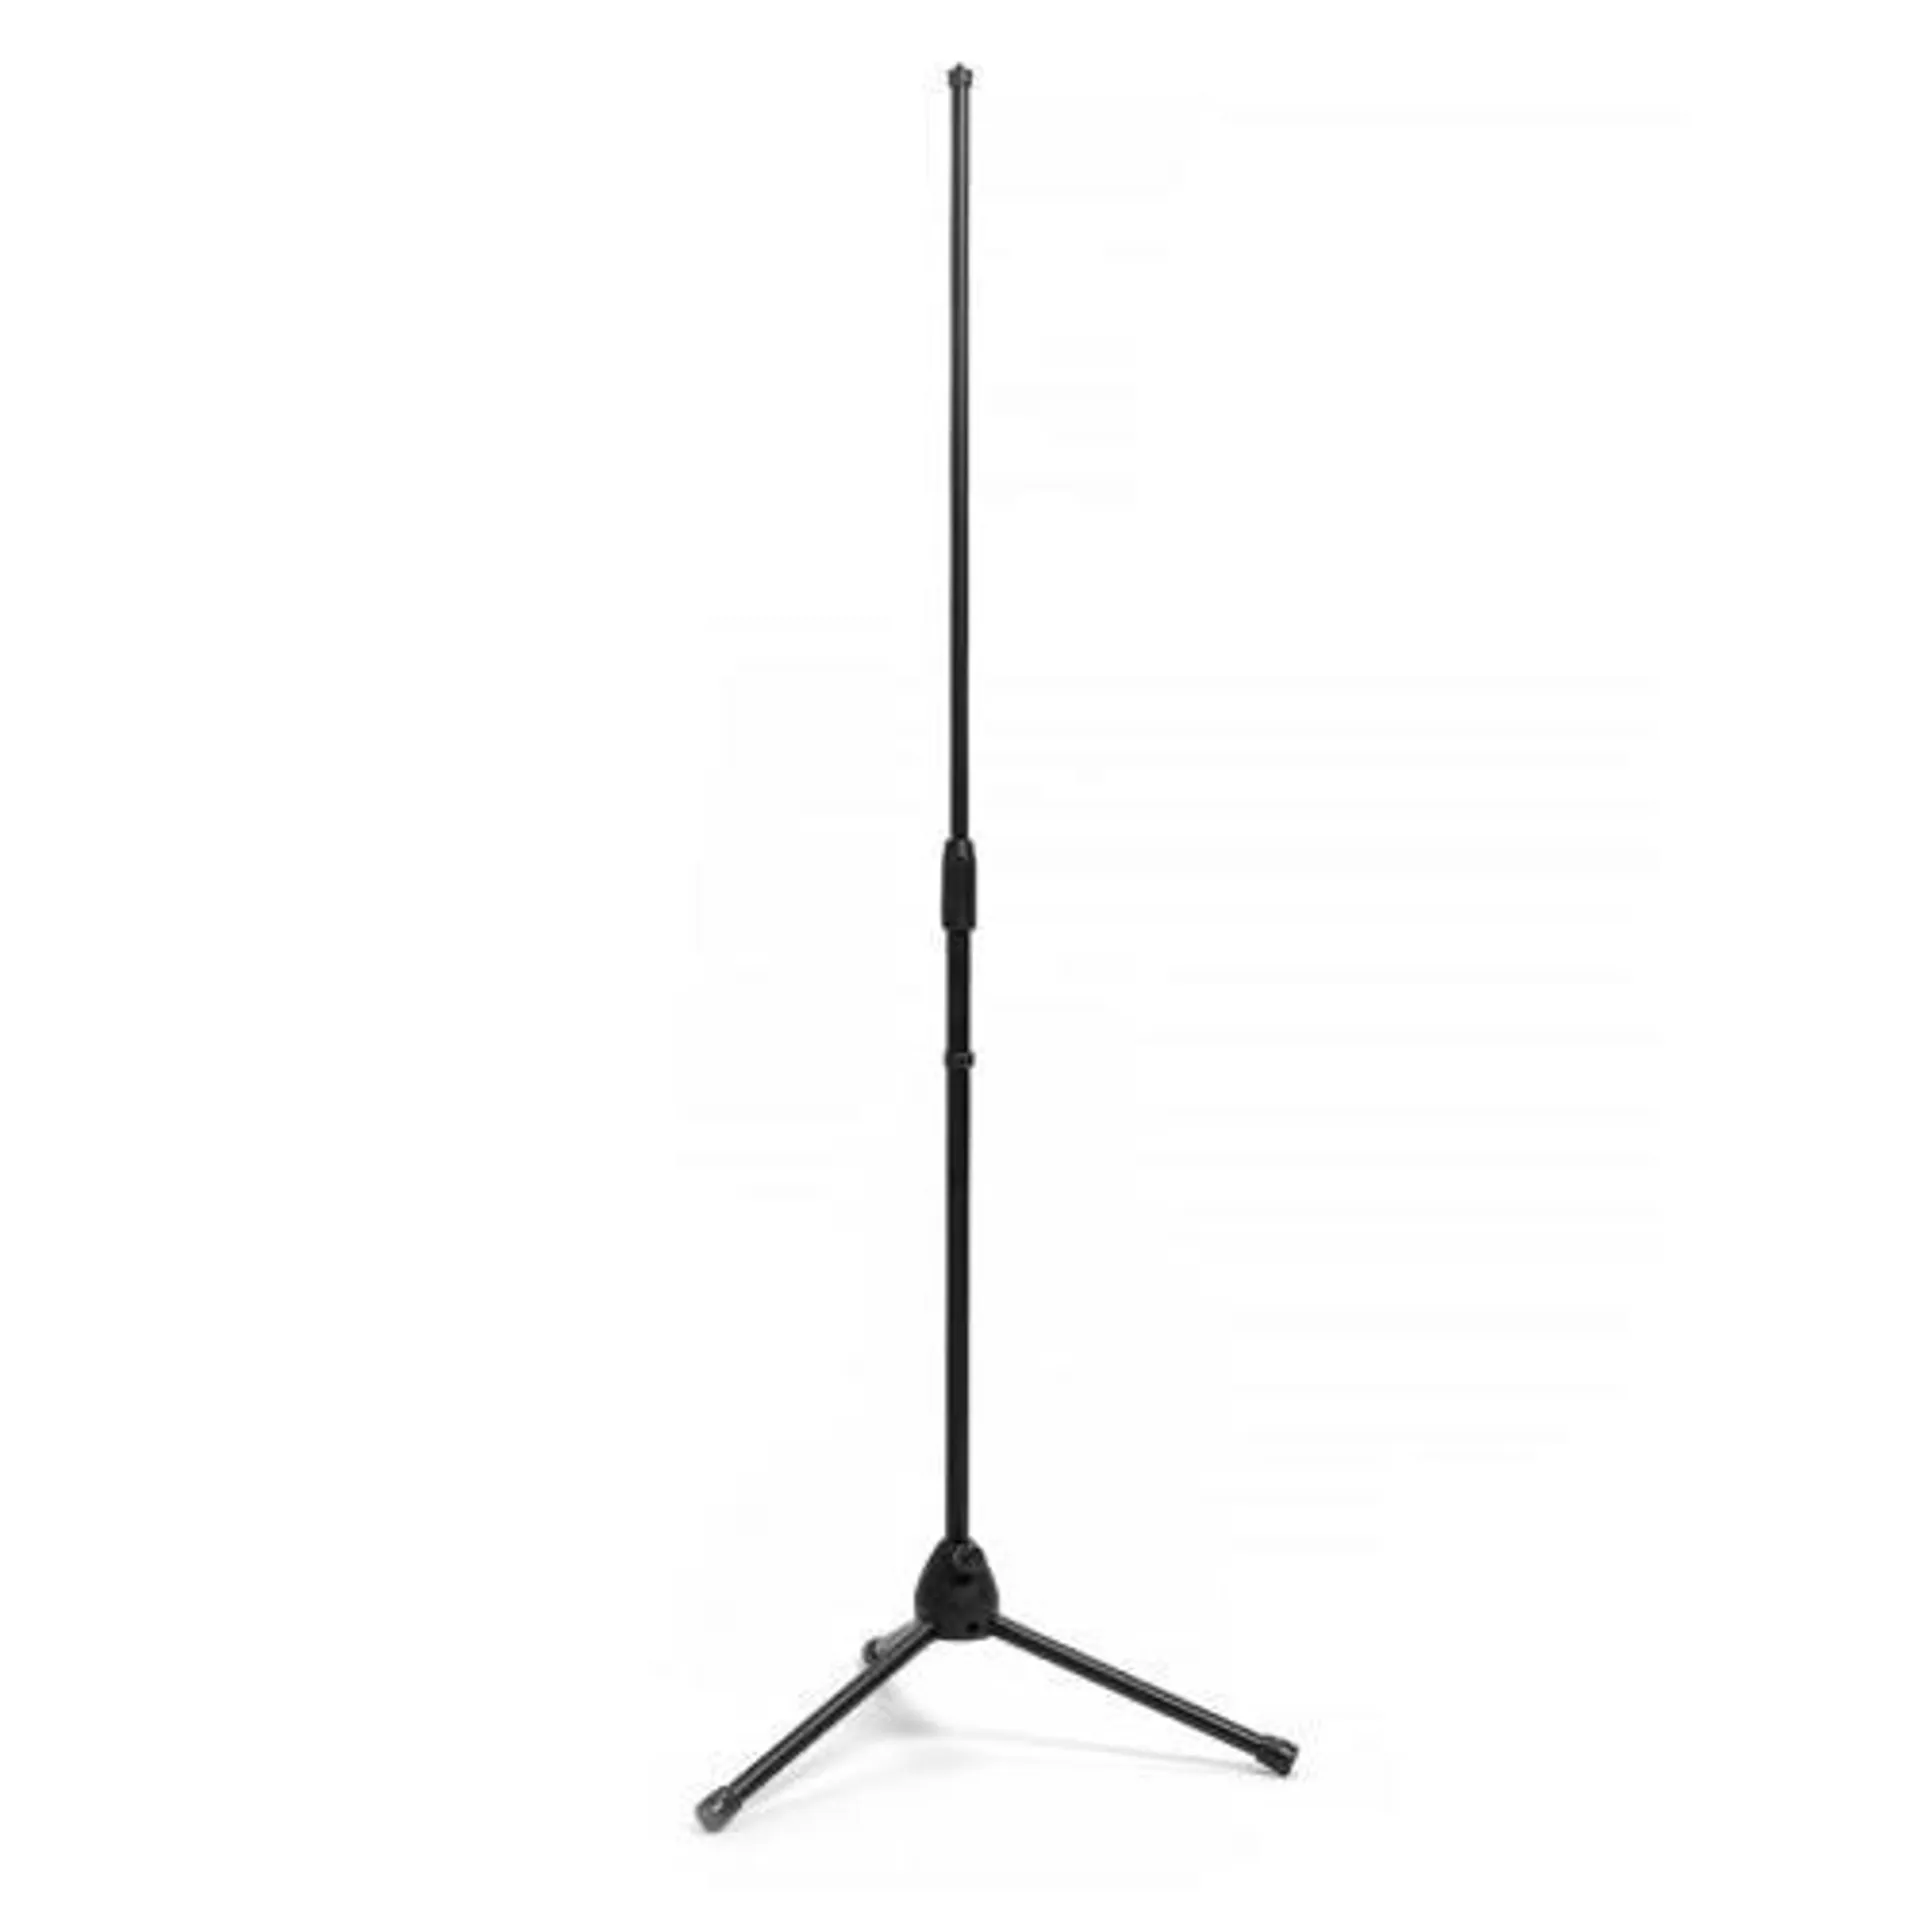 Foldable Tripod Stand For Projector, Height adjustable from 75cm - 148cm - PrimeCables®